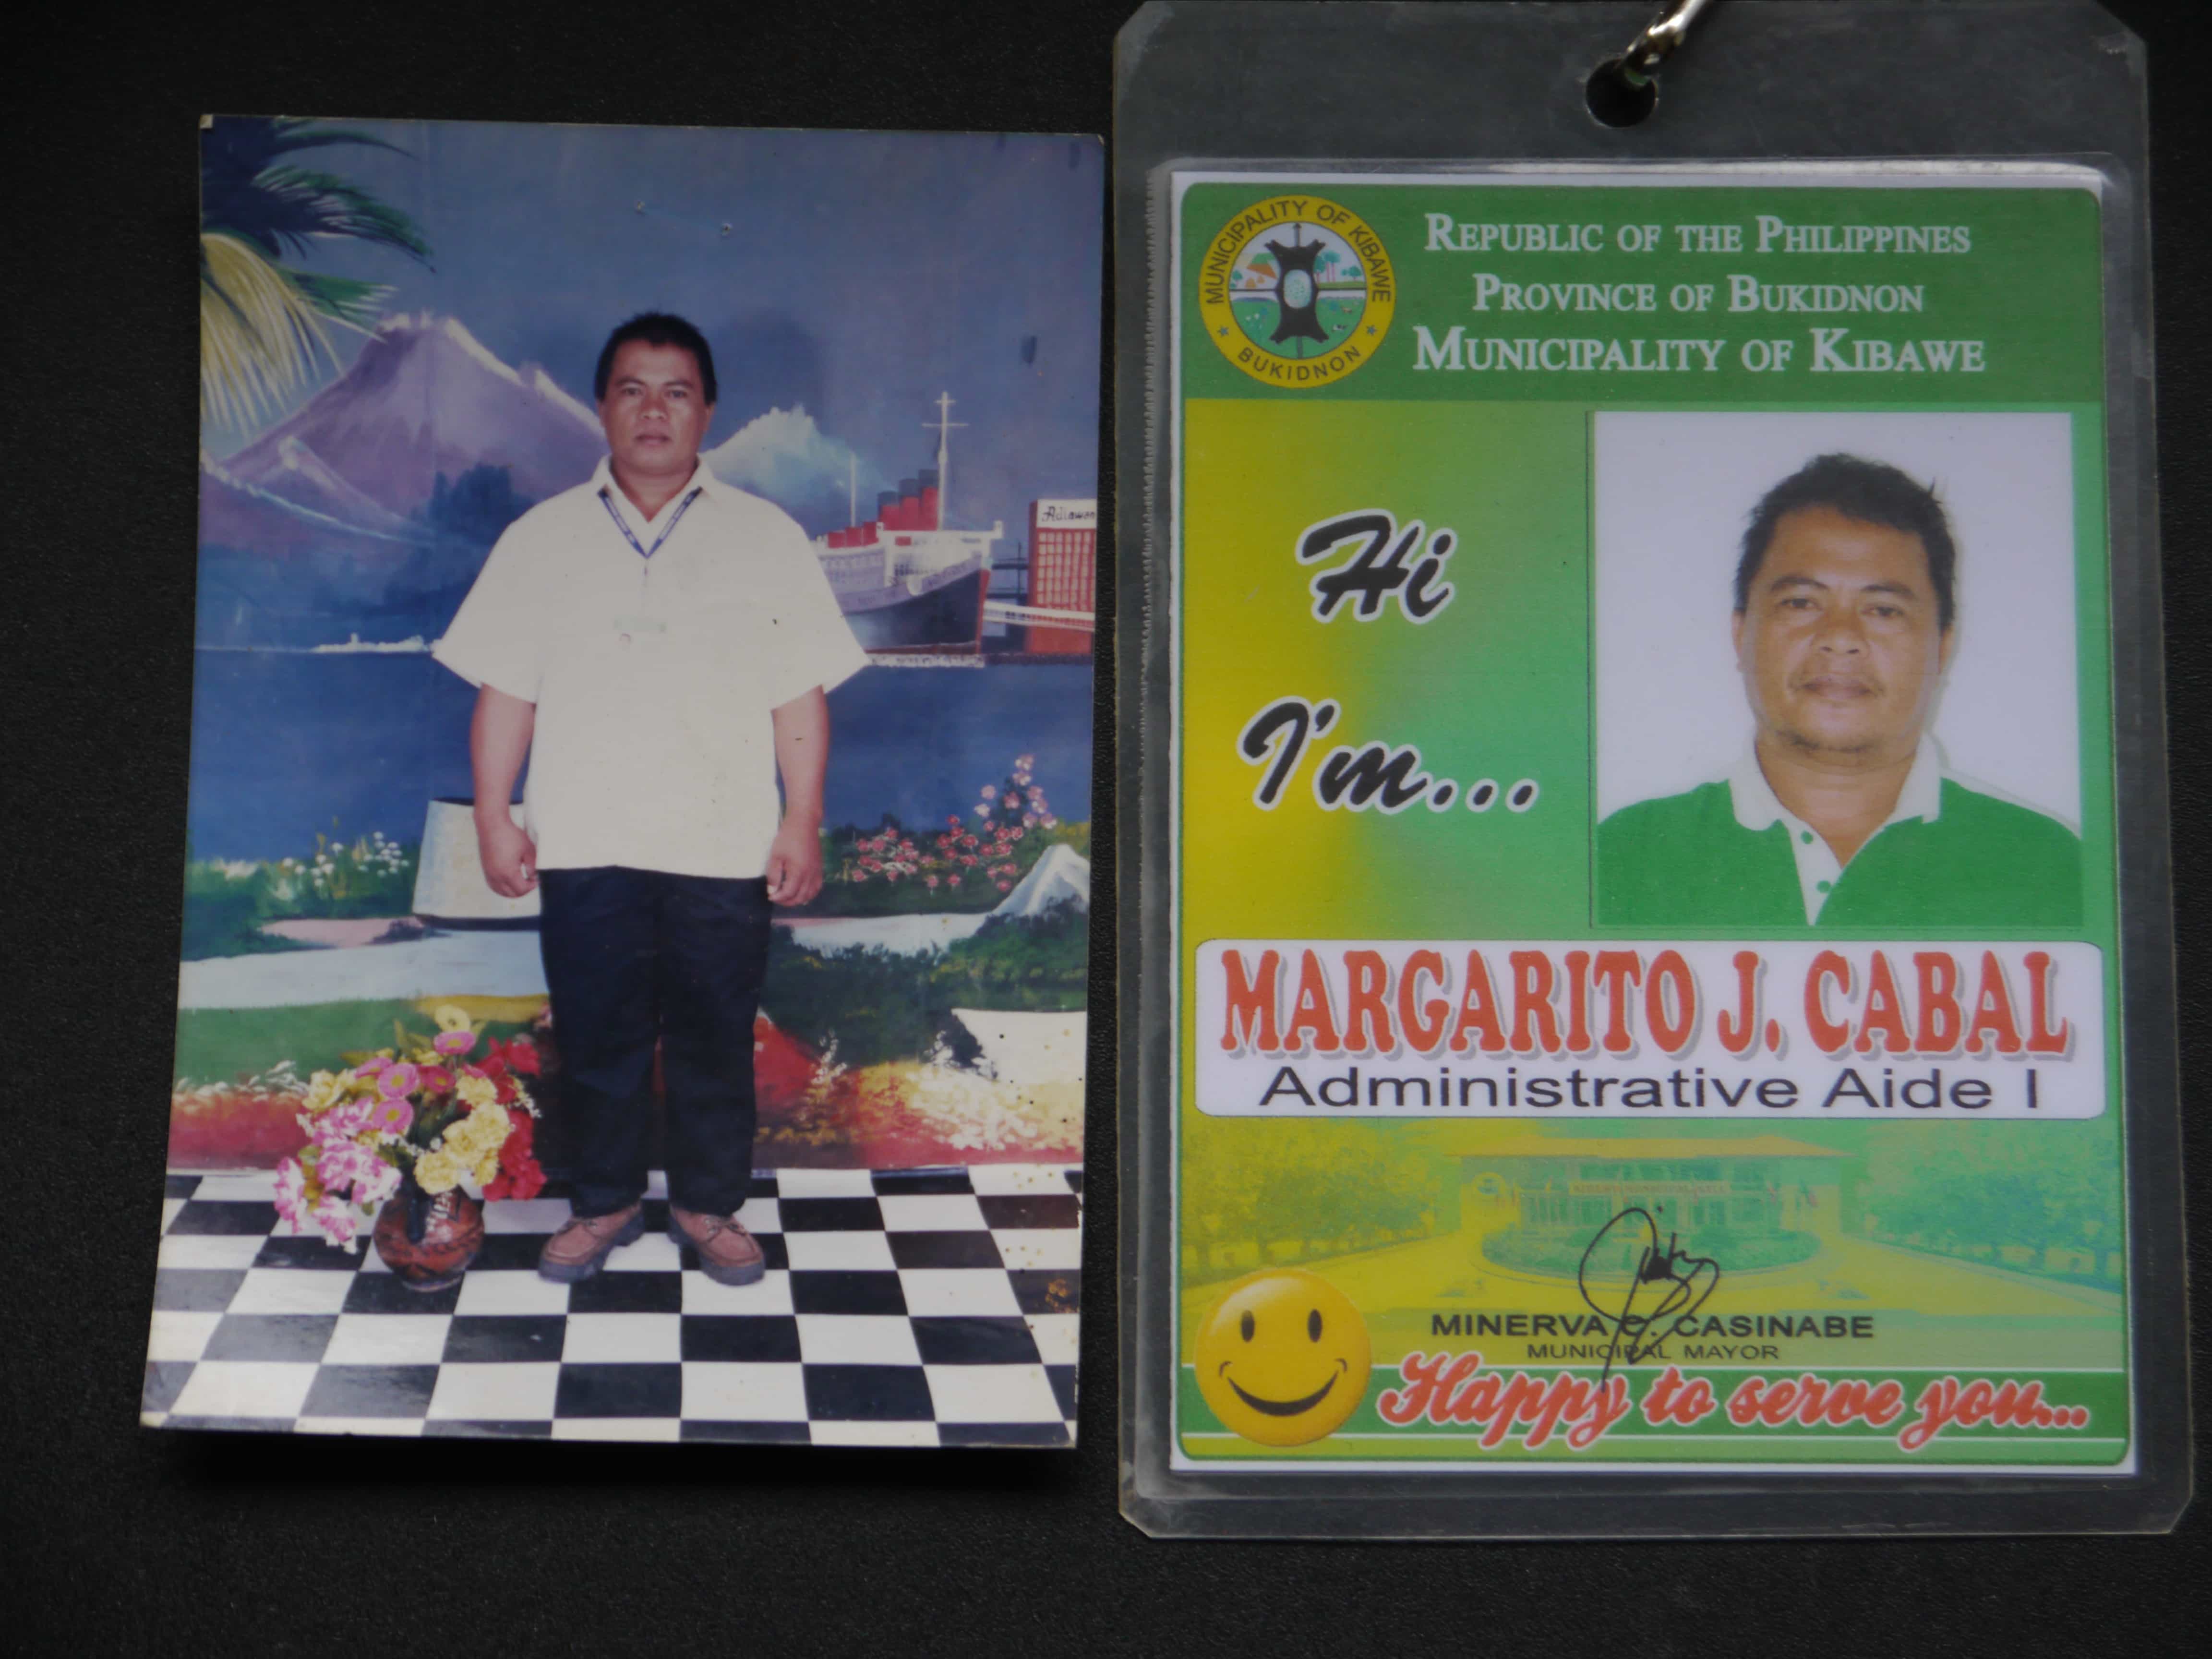 Margarito Cabal, organiser of a group opposing a hydroelectric dam, was gunned down on 9 May 2012, Human Rights Watch